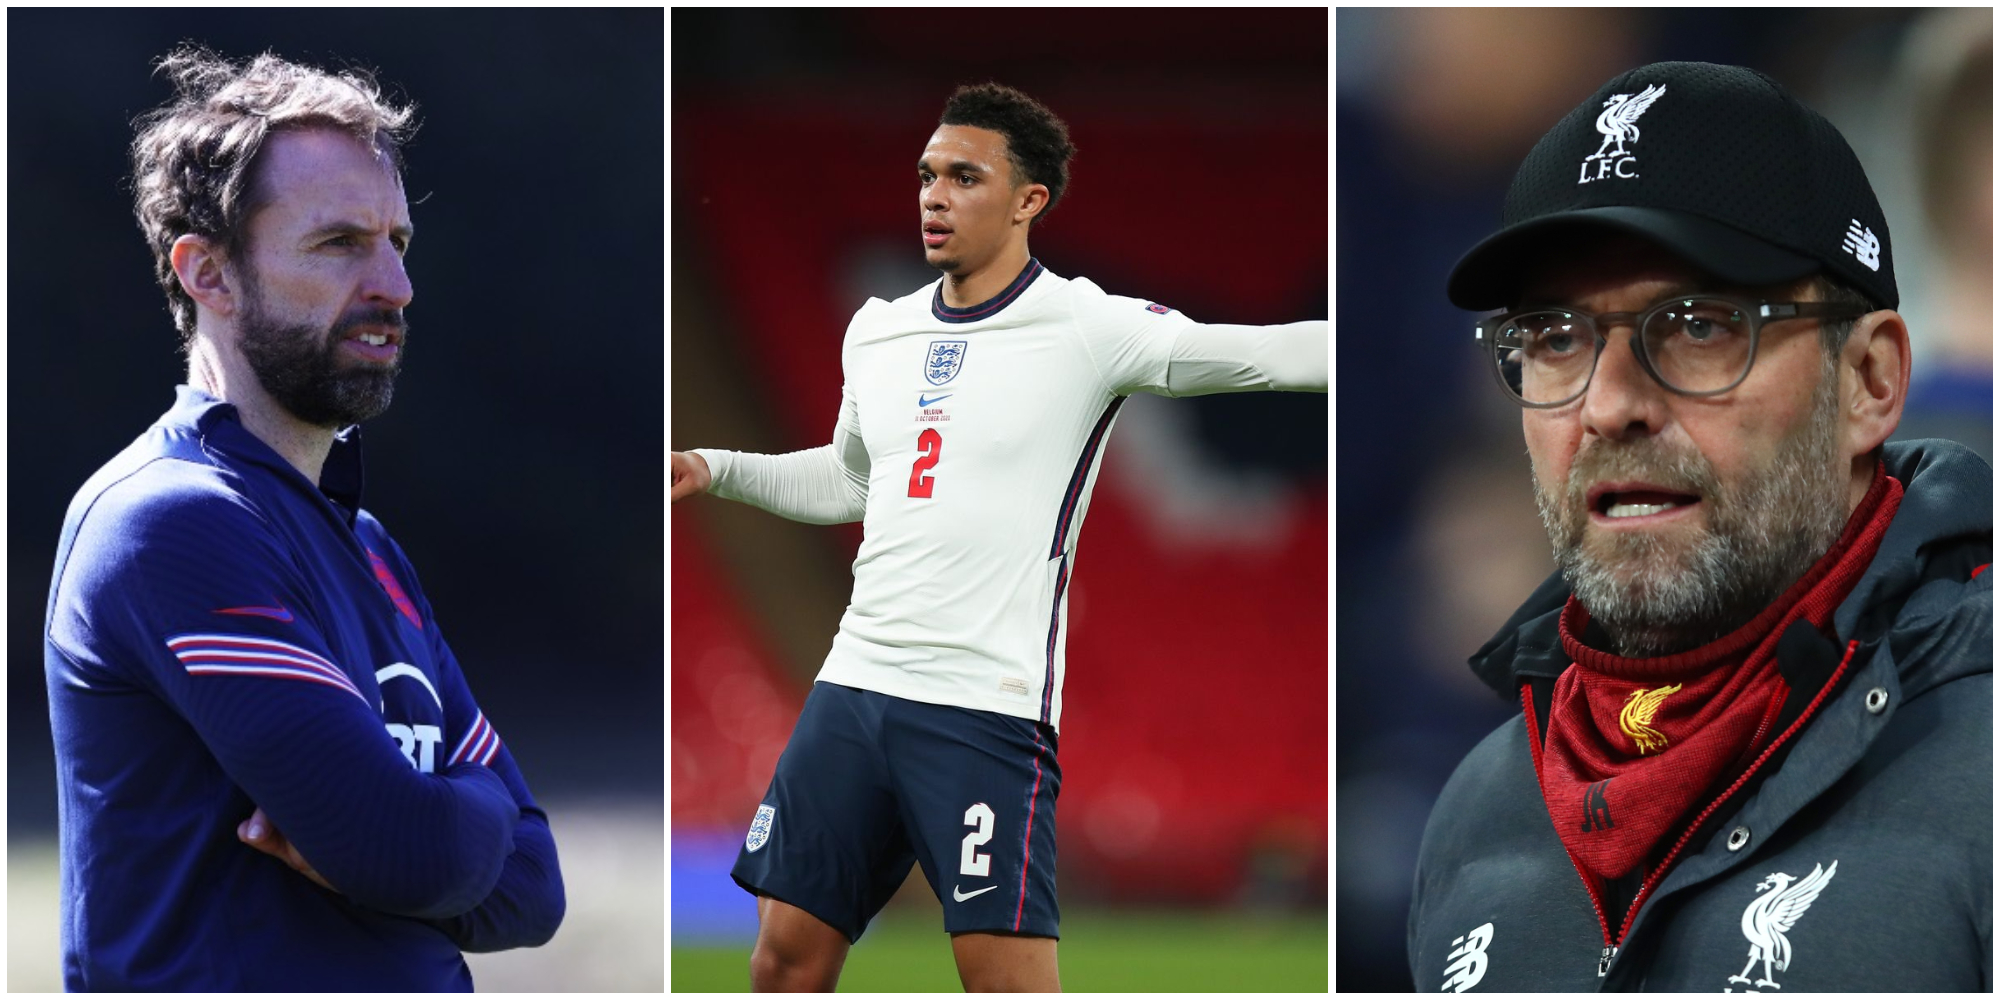 ‘None of these players has the package like Trent’ – Klopp questions Southgate’s England selection